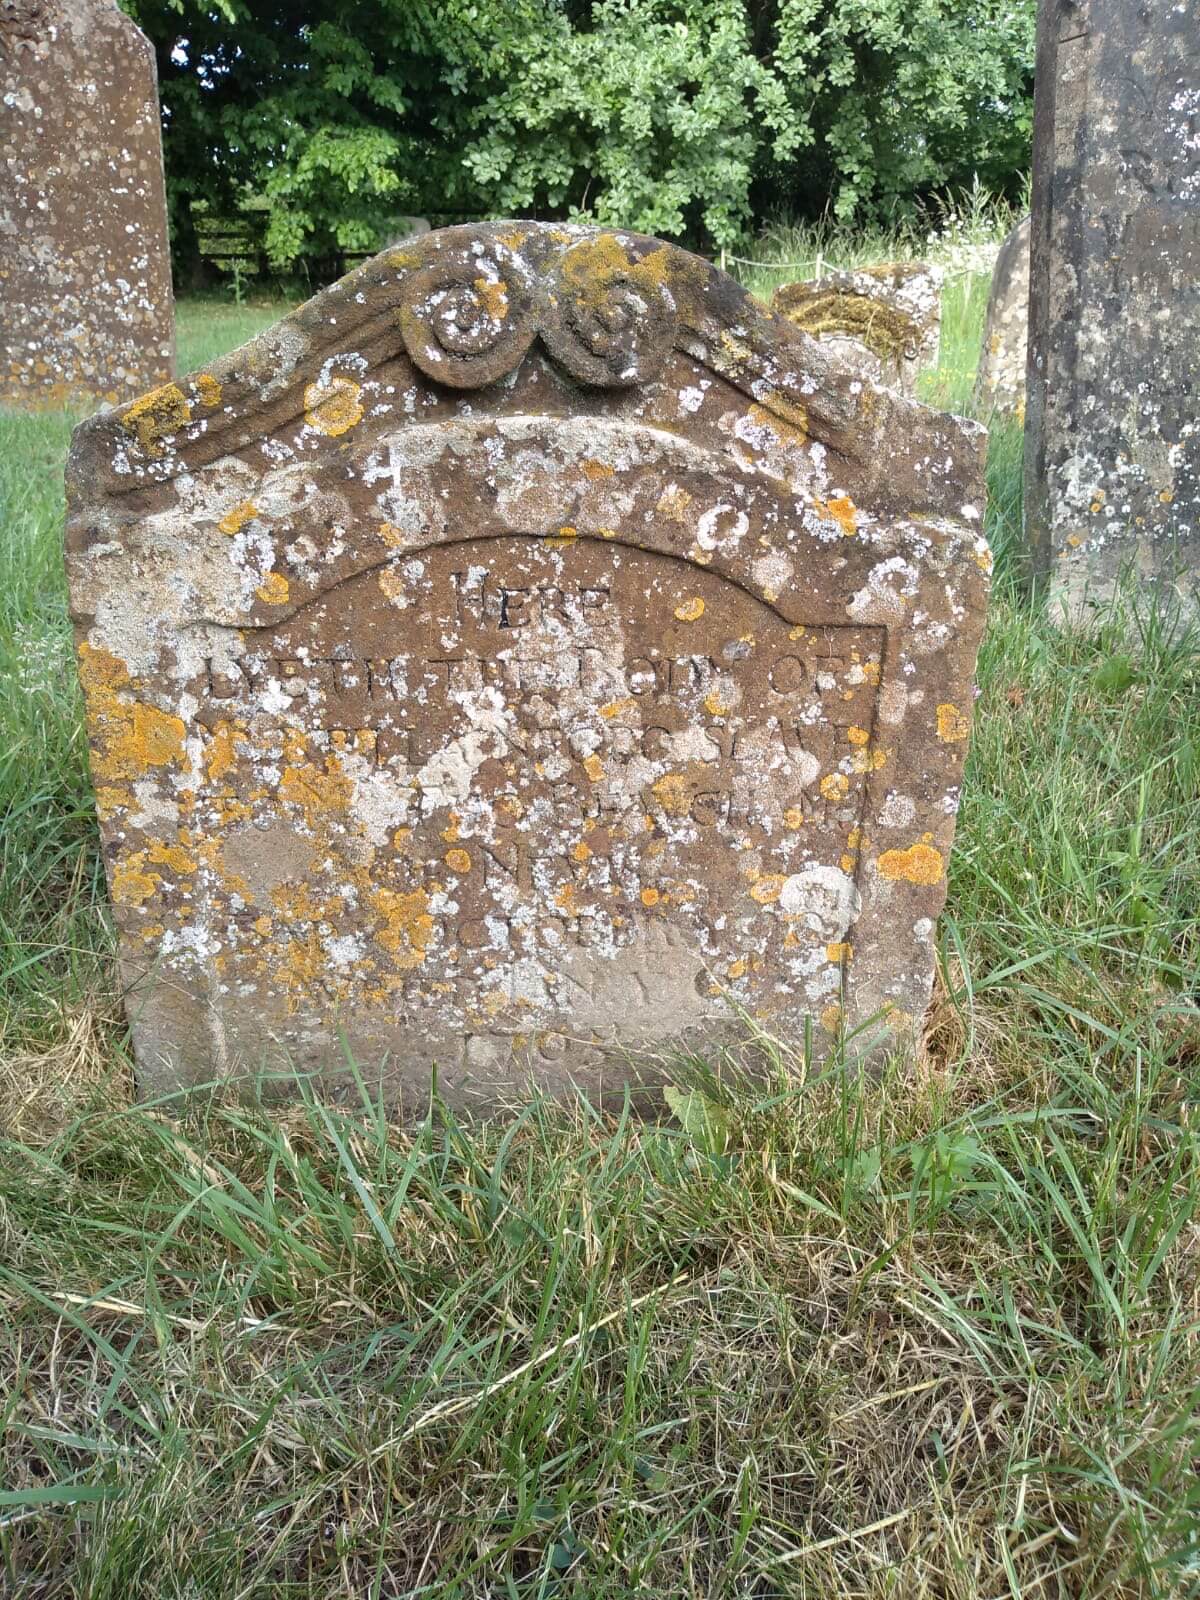 Headstone with scrolled detail to the top, the brown stone mottled with lichen. The indistinct inscription begins ‘Here lieth the body of Myrtilla negro slave’ and ends ‘baptised October 20th, buried January 6th 1705’.